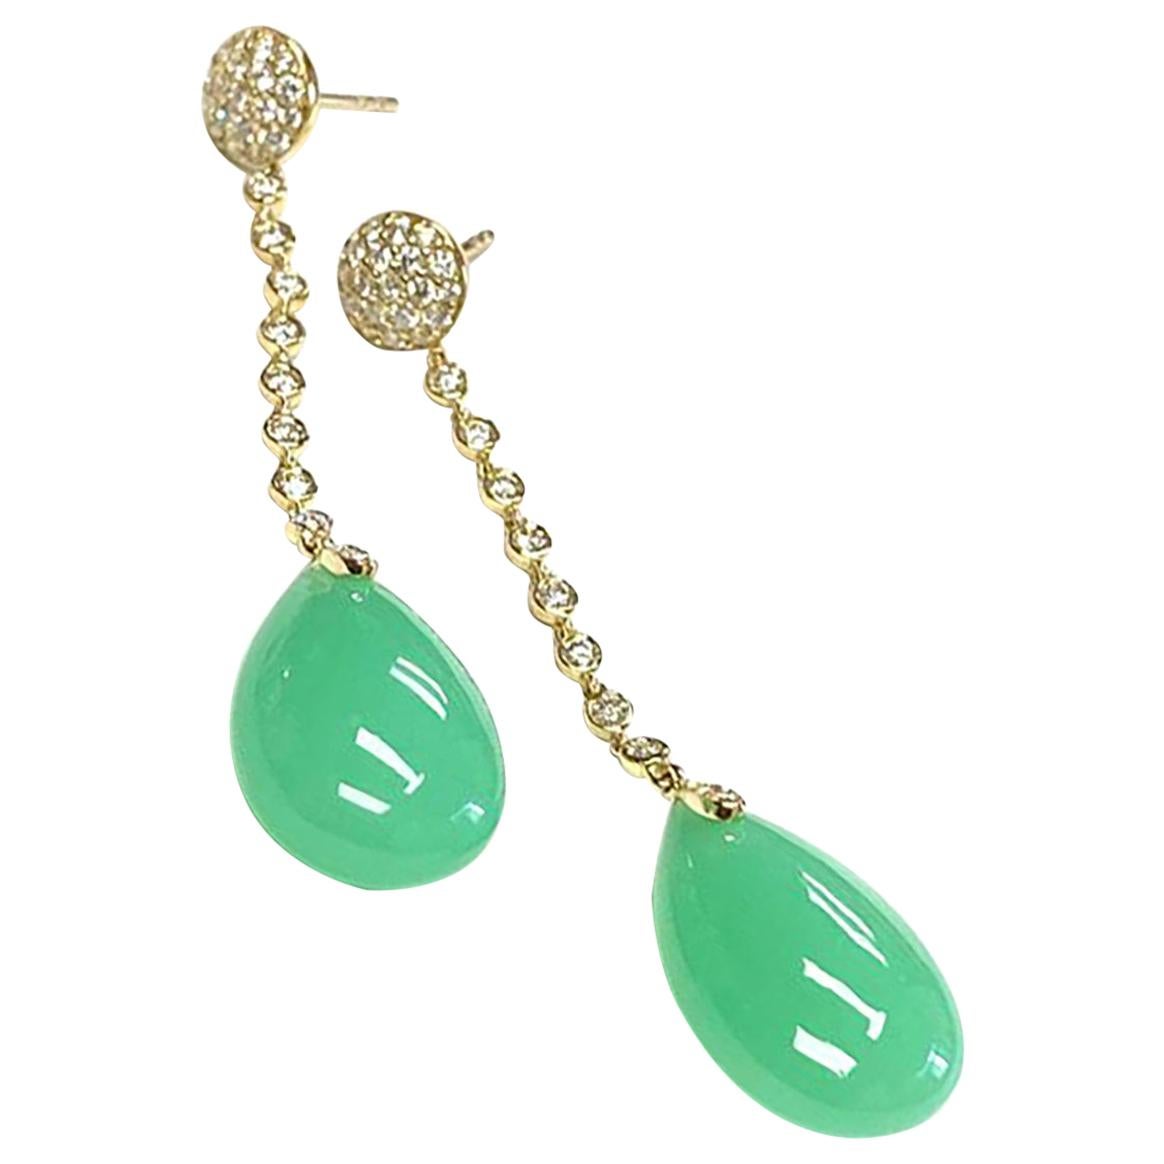 Goshwara Opal, Emerald And Turquoise Drop With Diamond Earrings For ...